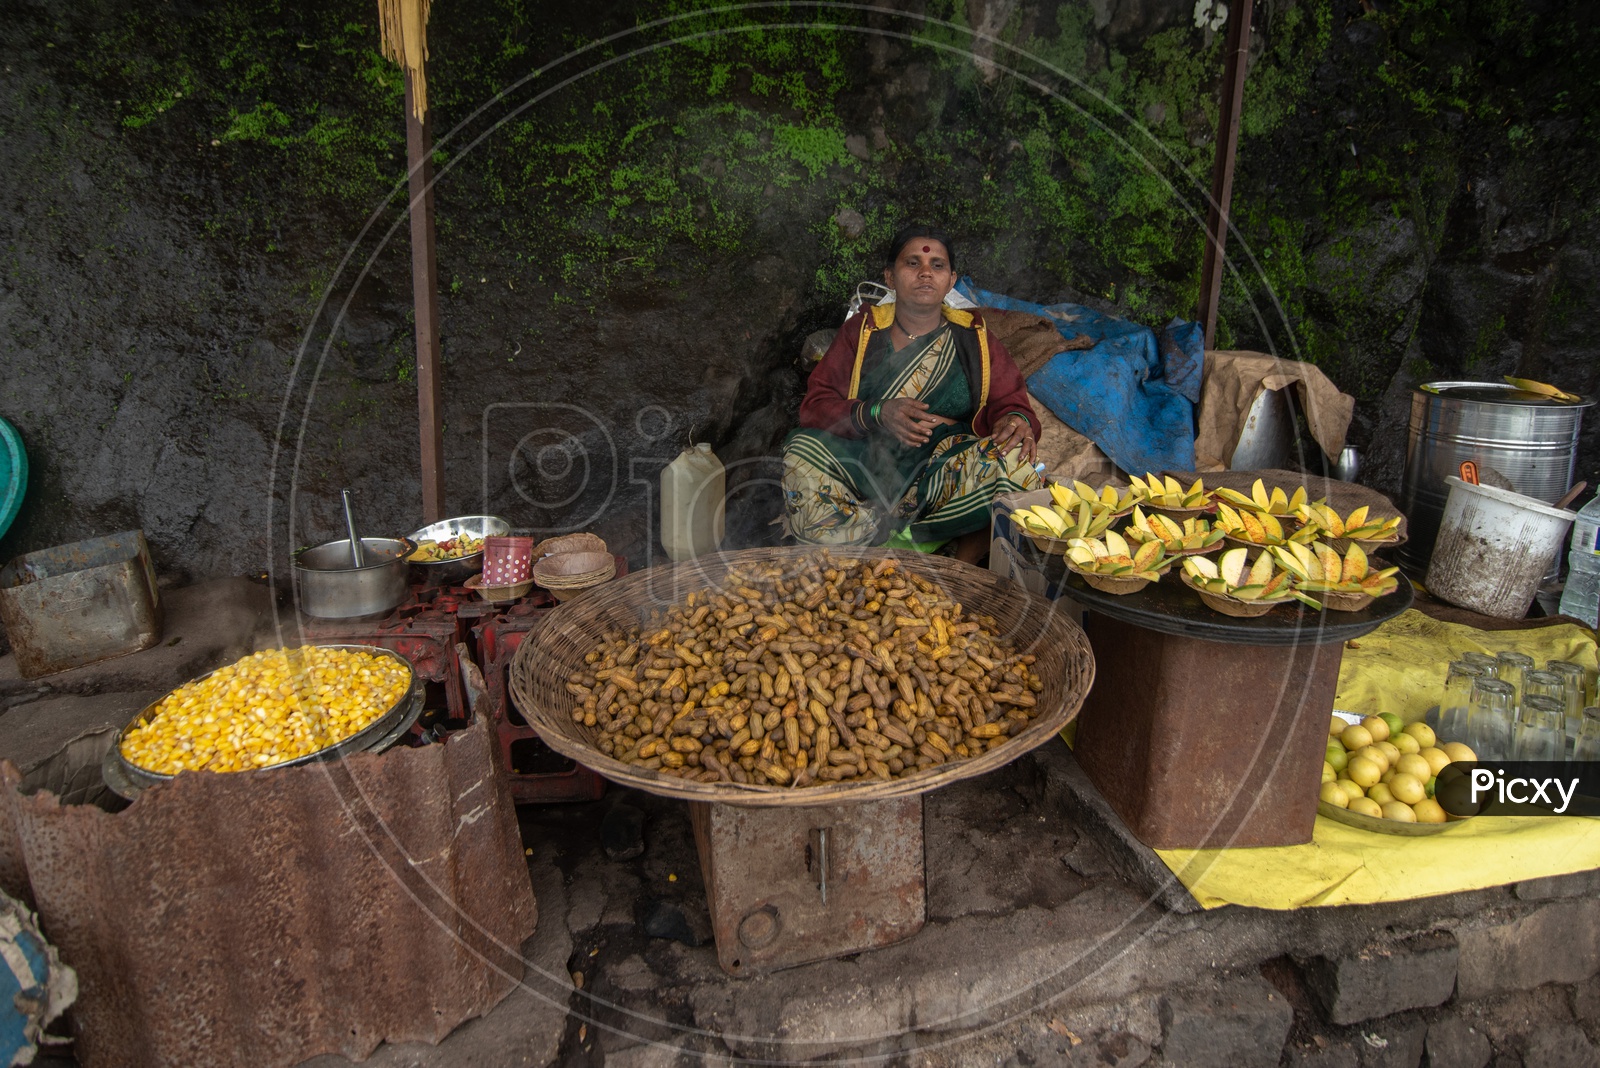 Lady selling delicious eateries at Sinhagad Fort